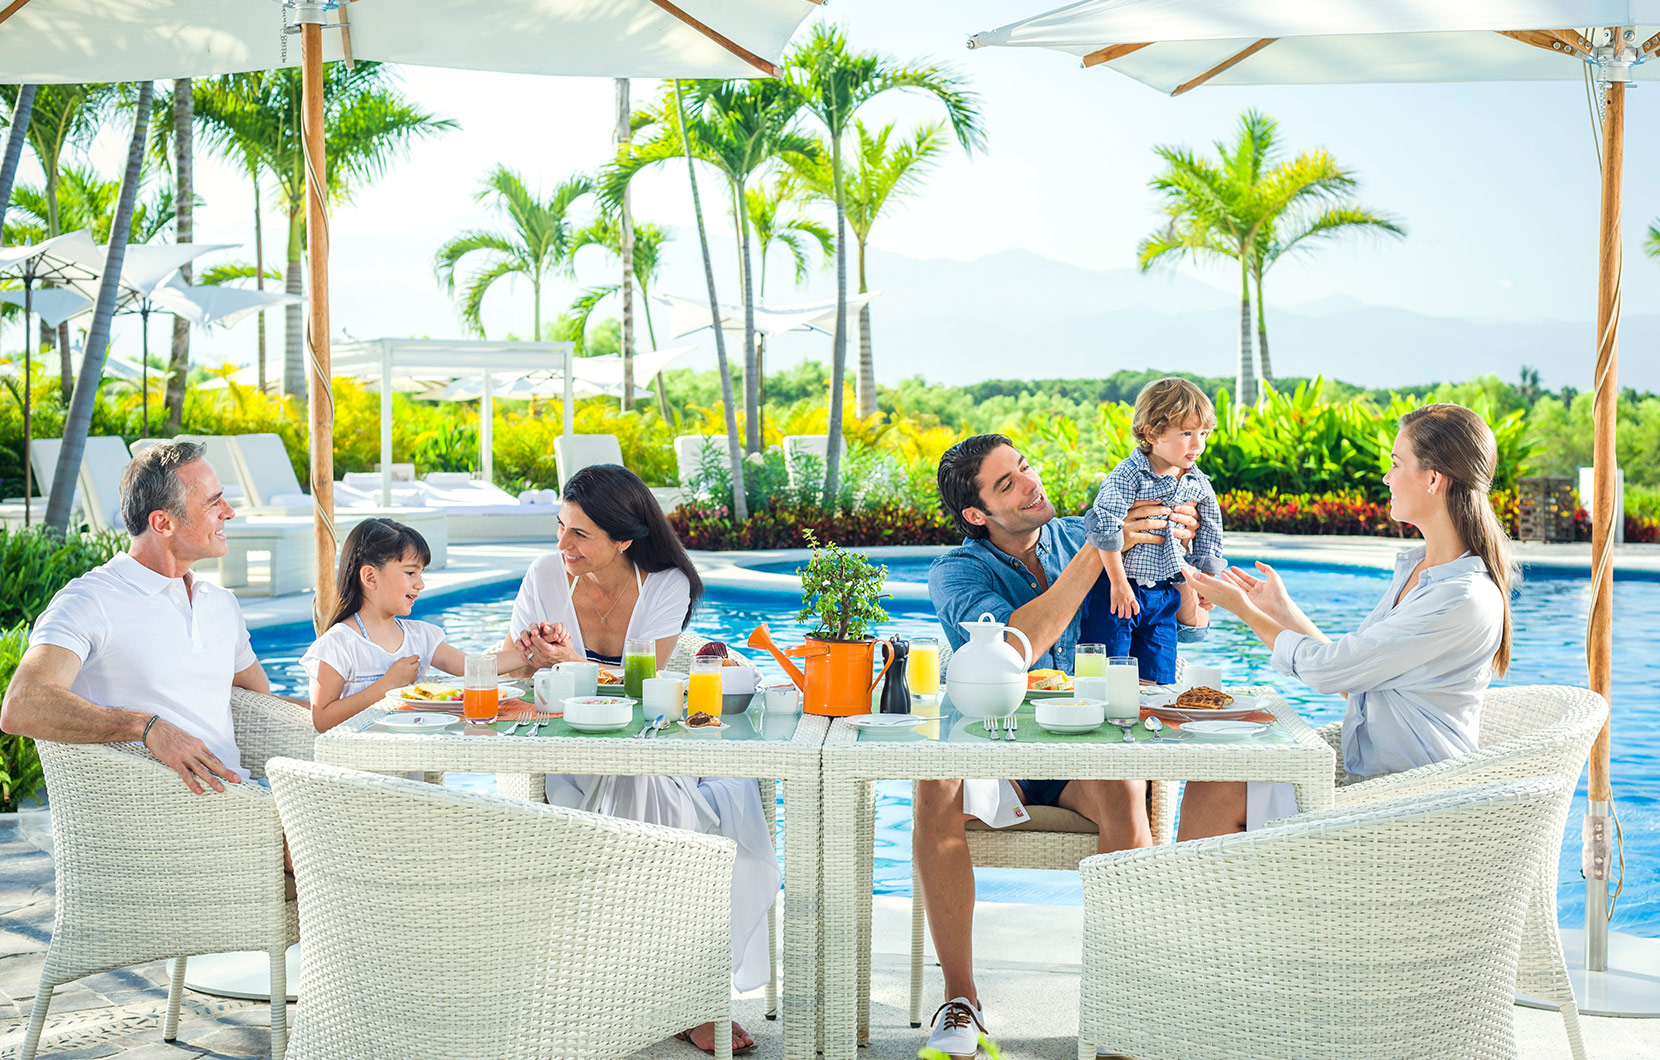 The whole family can spend the week having fun together with The Mas The Merrier Package.